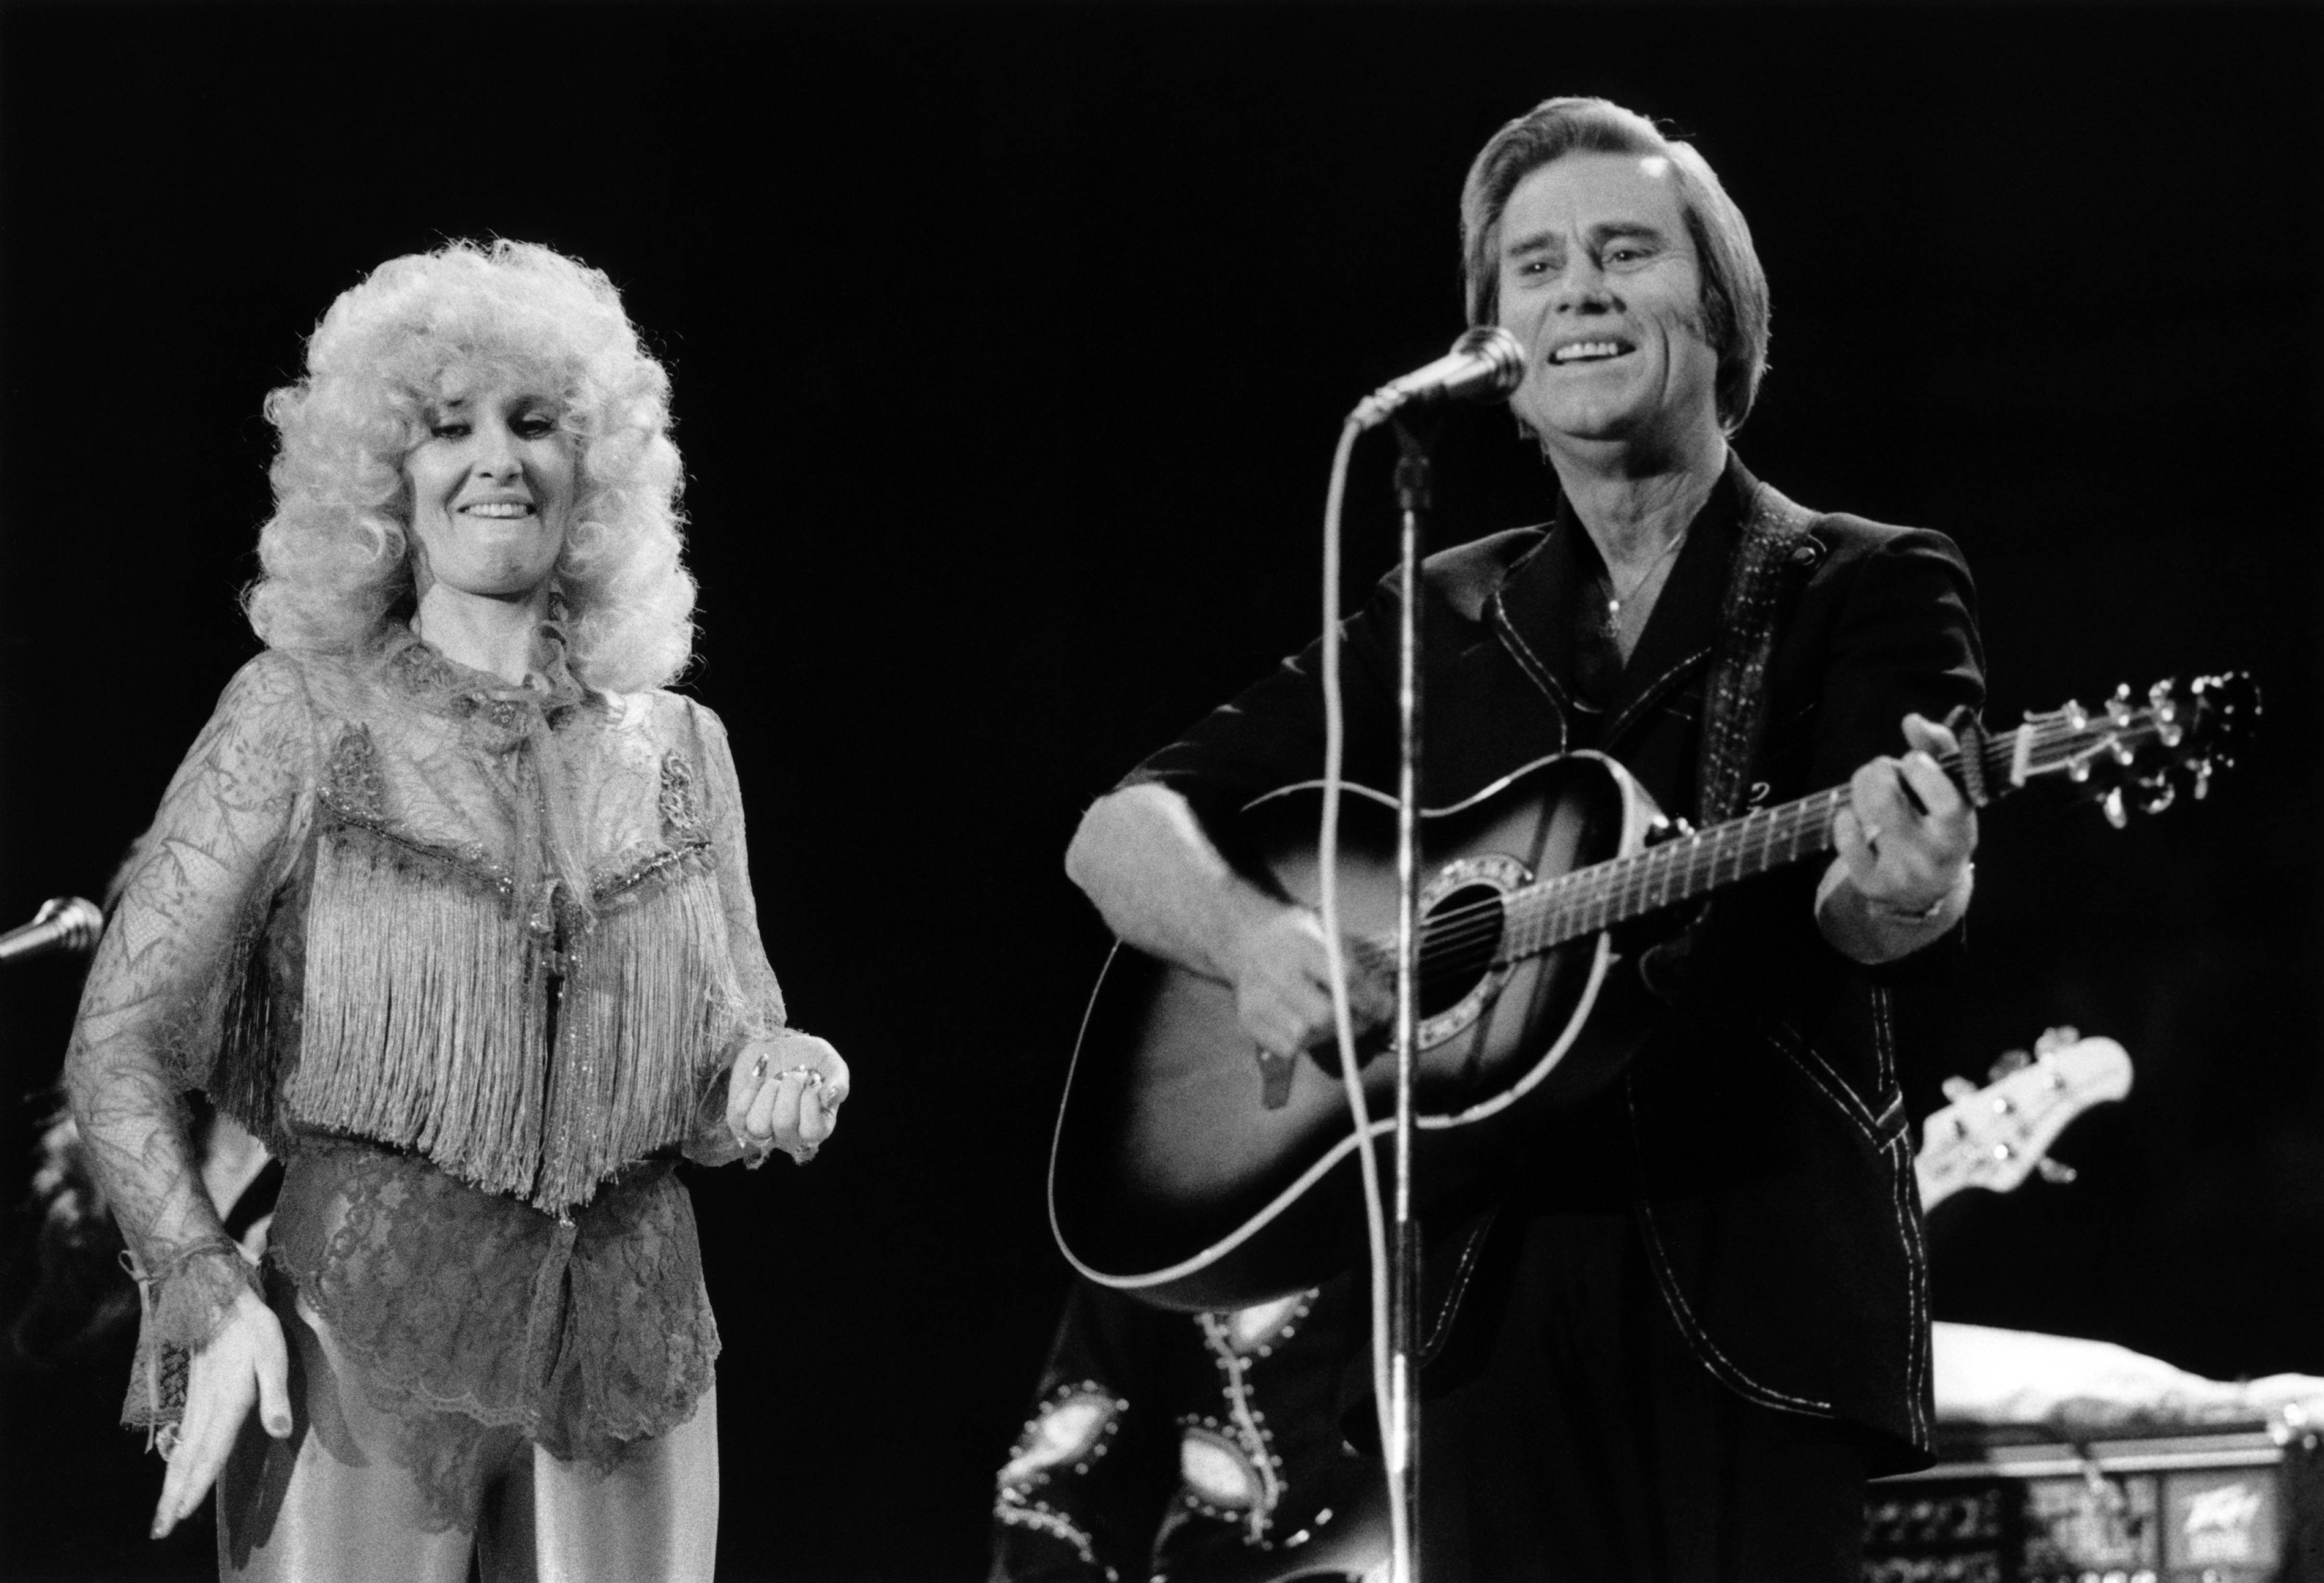 Tammy Wynette and George Jones perform live on stage at the Country Music Festival, Wembley Arena, London in April 1981 | Source: Getty Images